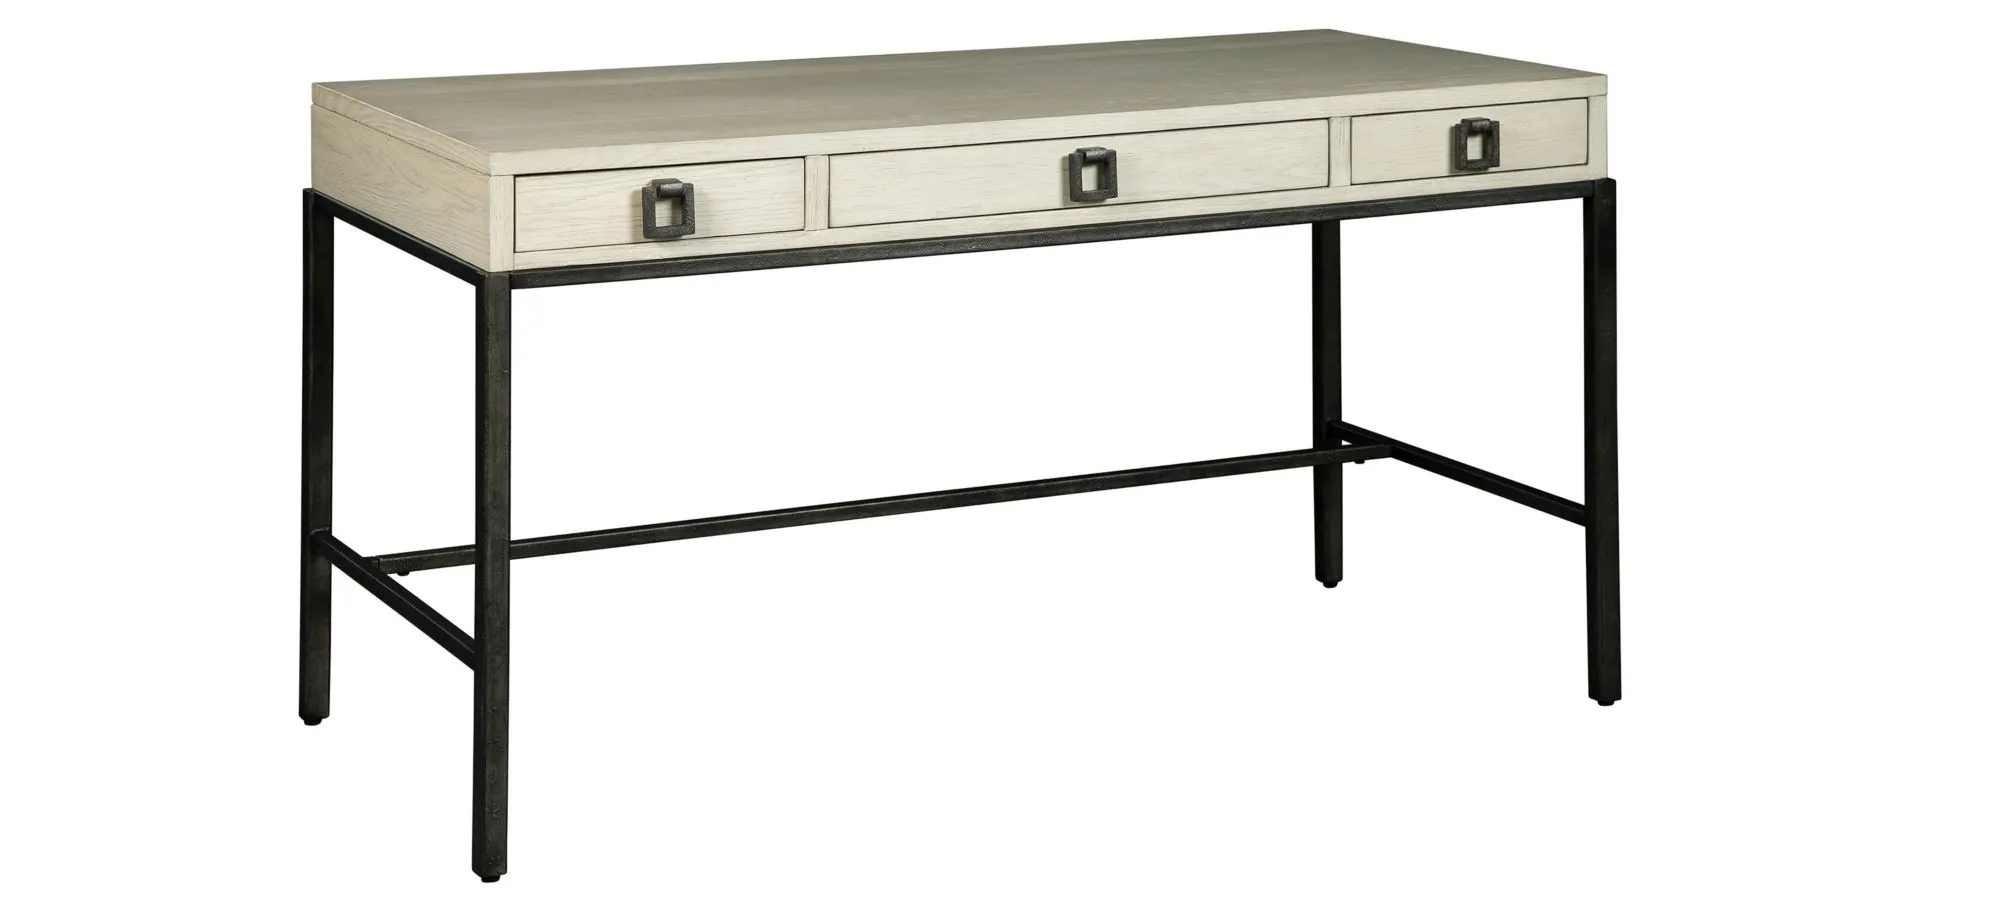 Hekman Desk in SPECIAL RESERVE by Hekman Furniture Company